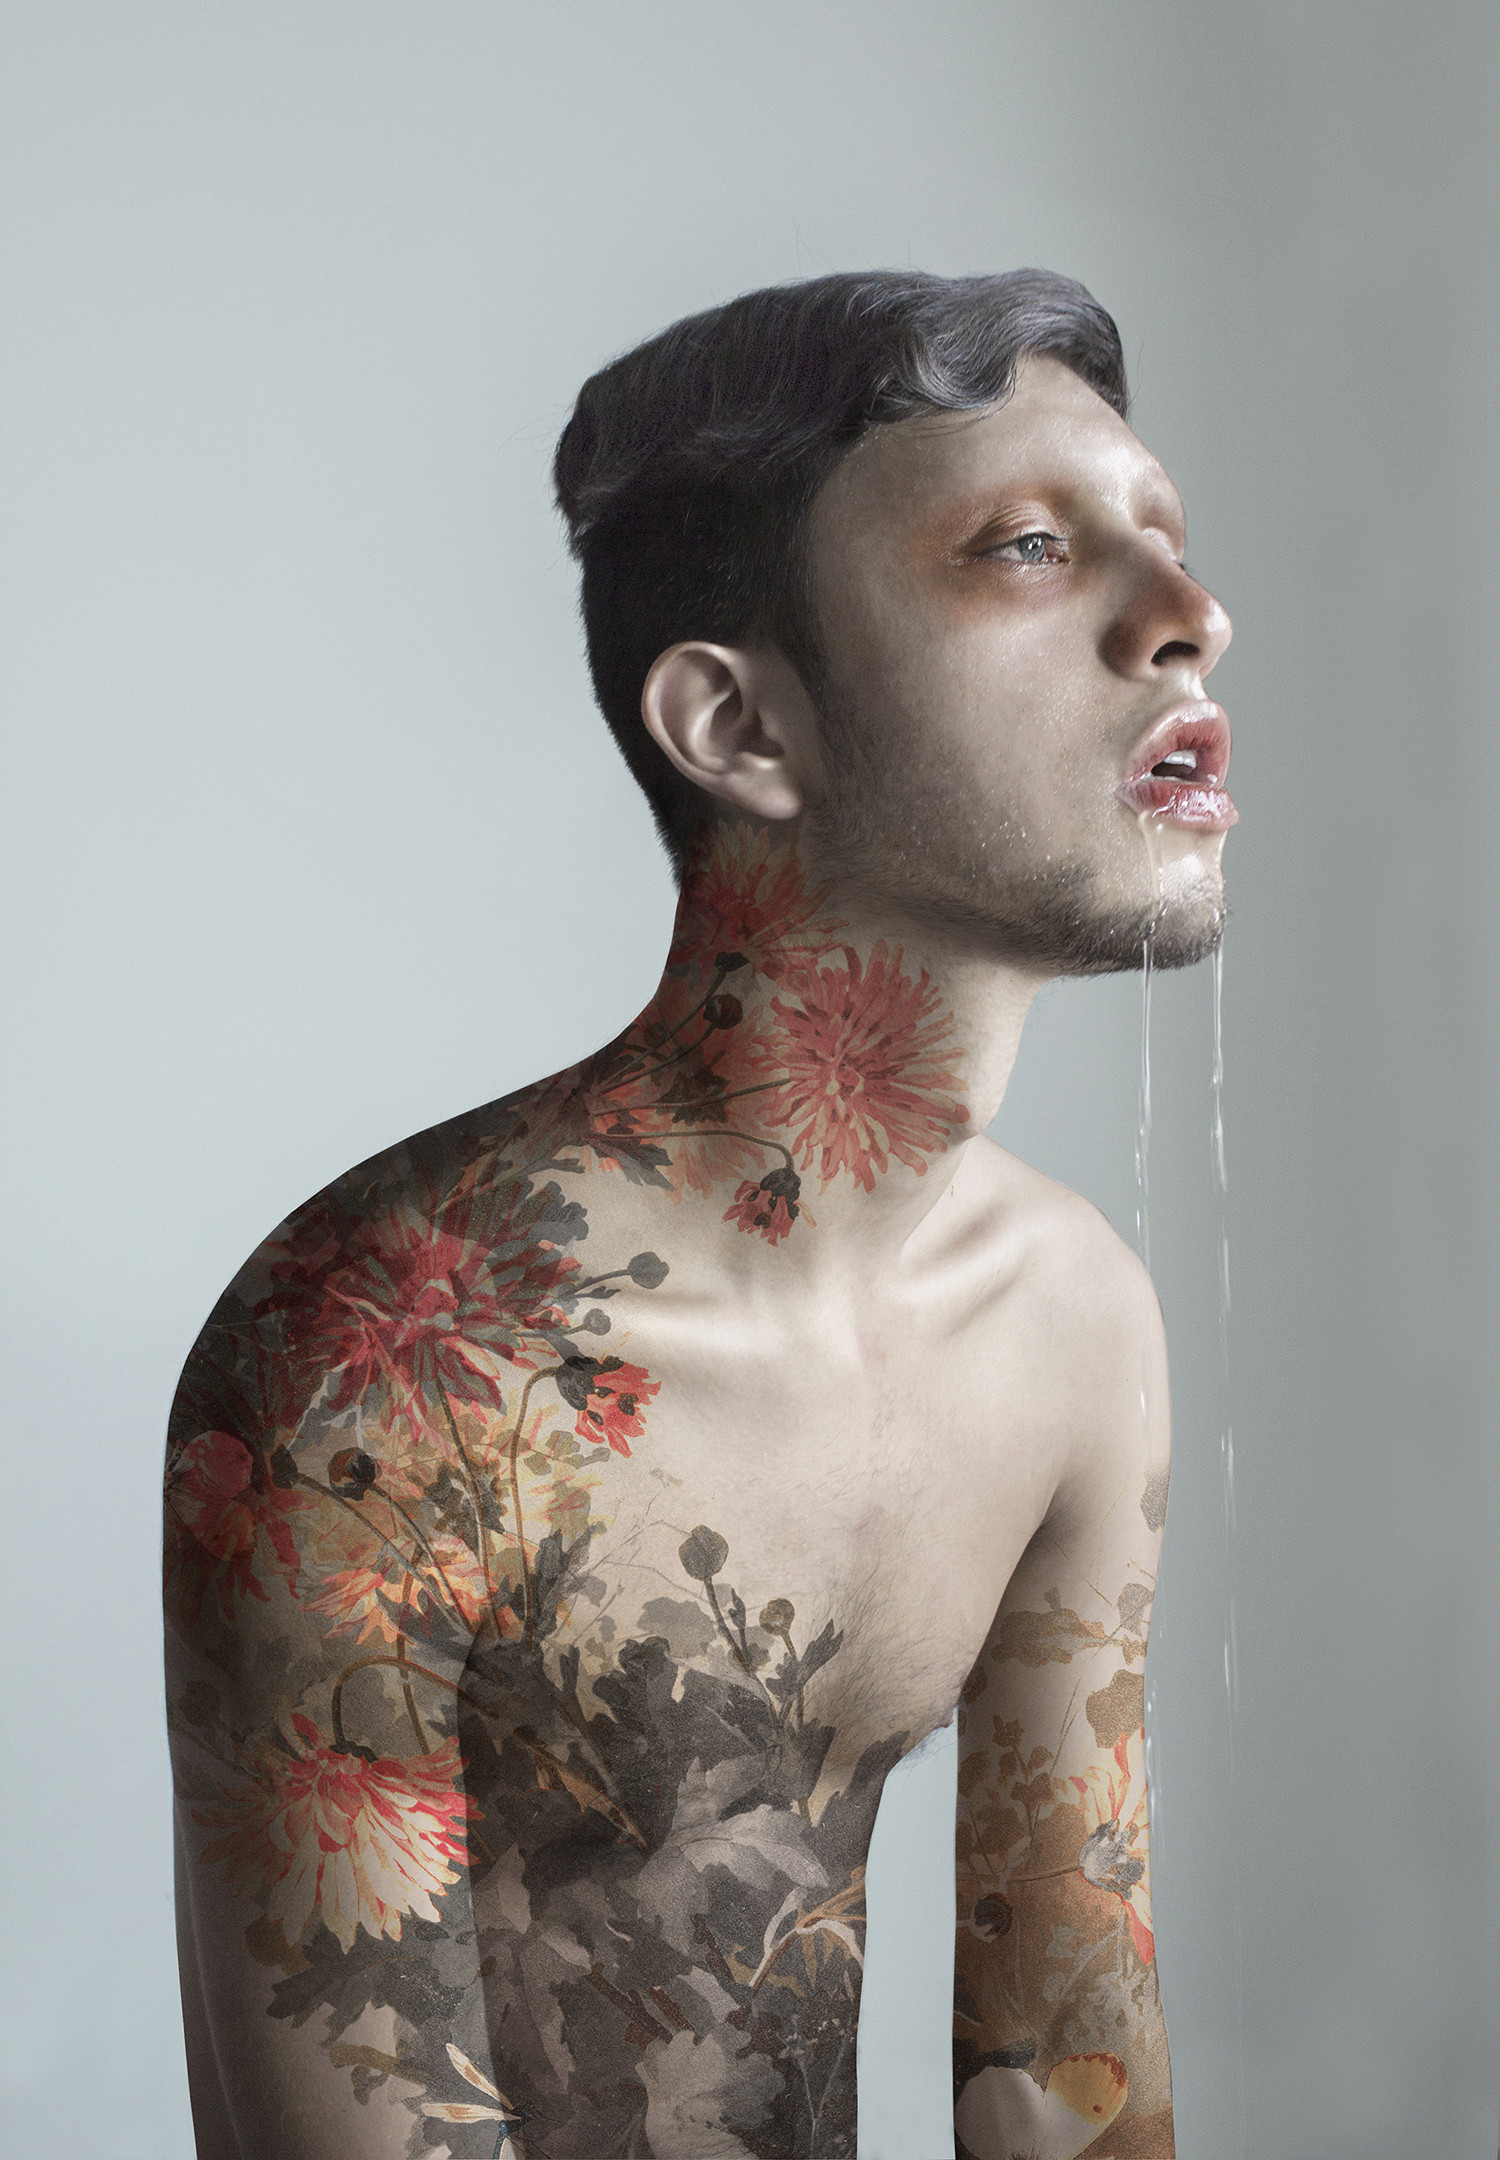 flower tattoos on arm, spit dripping from mouth